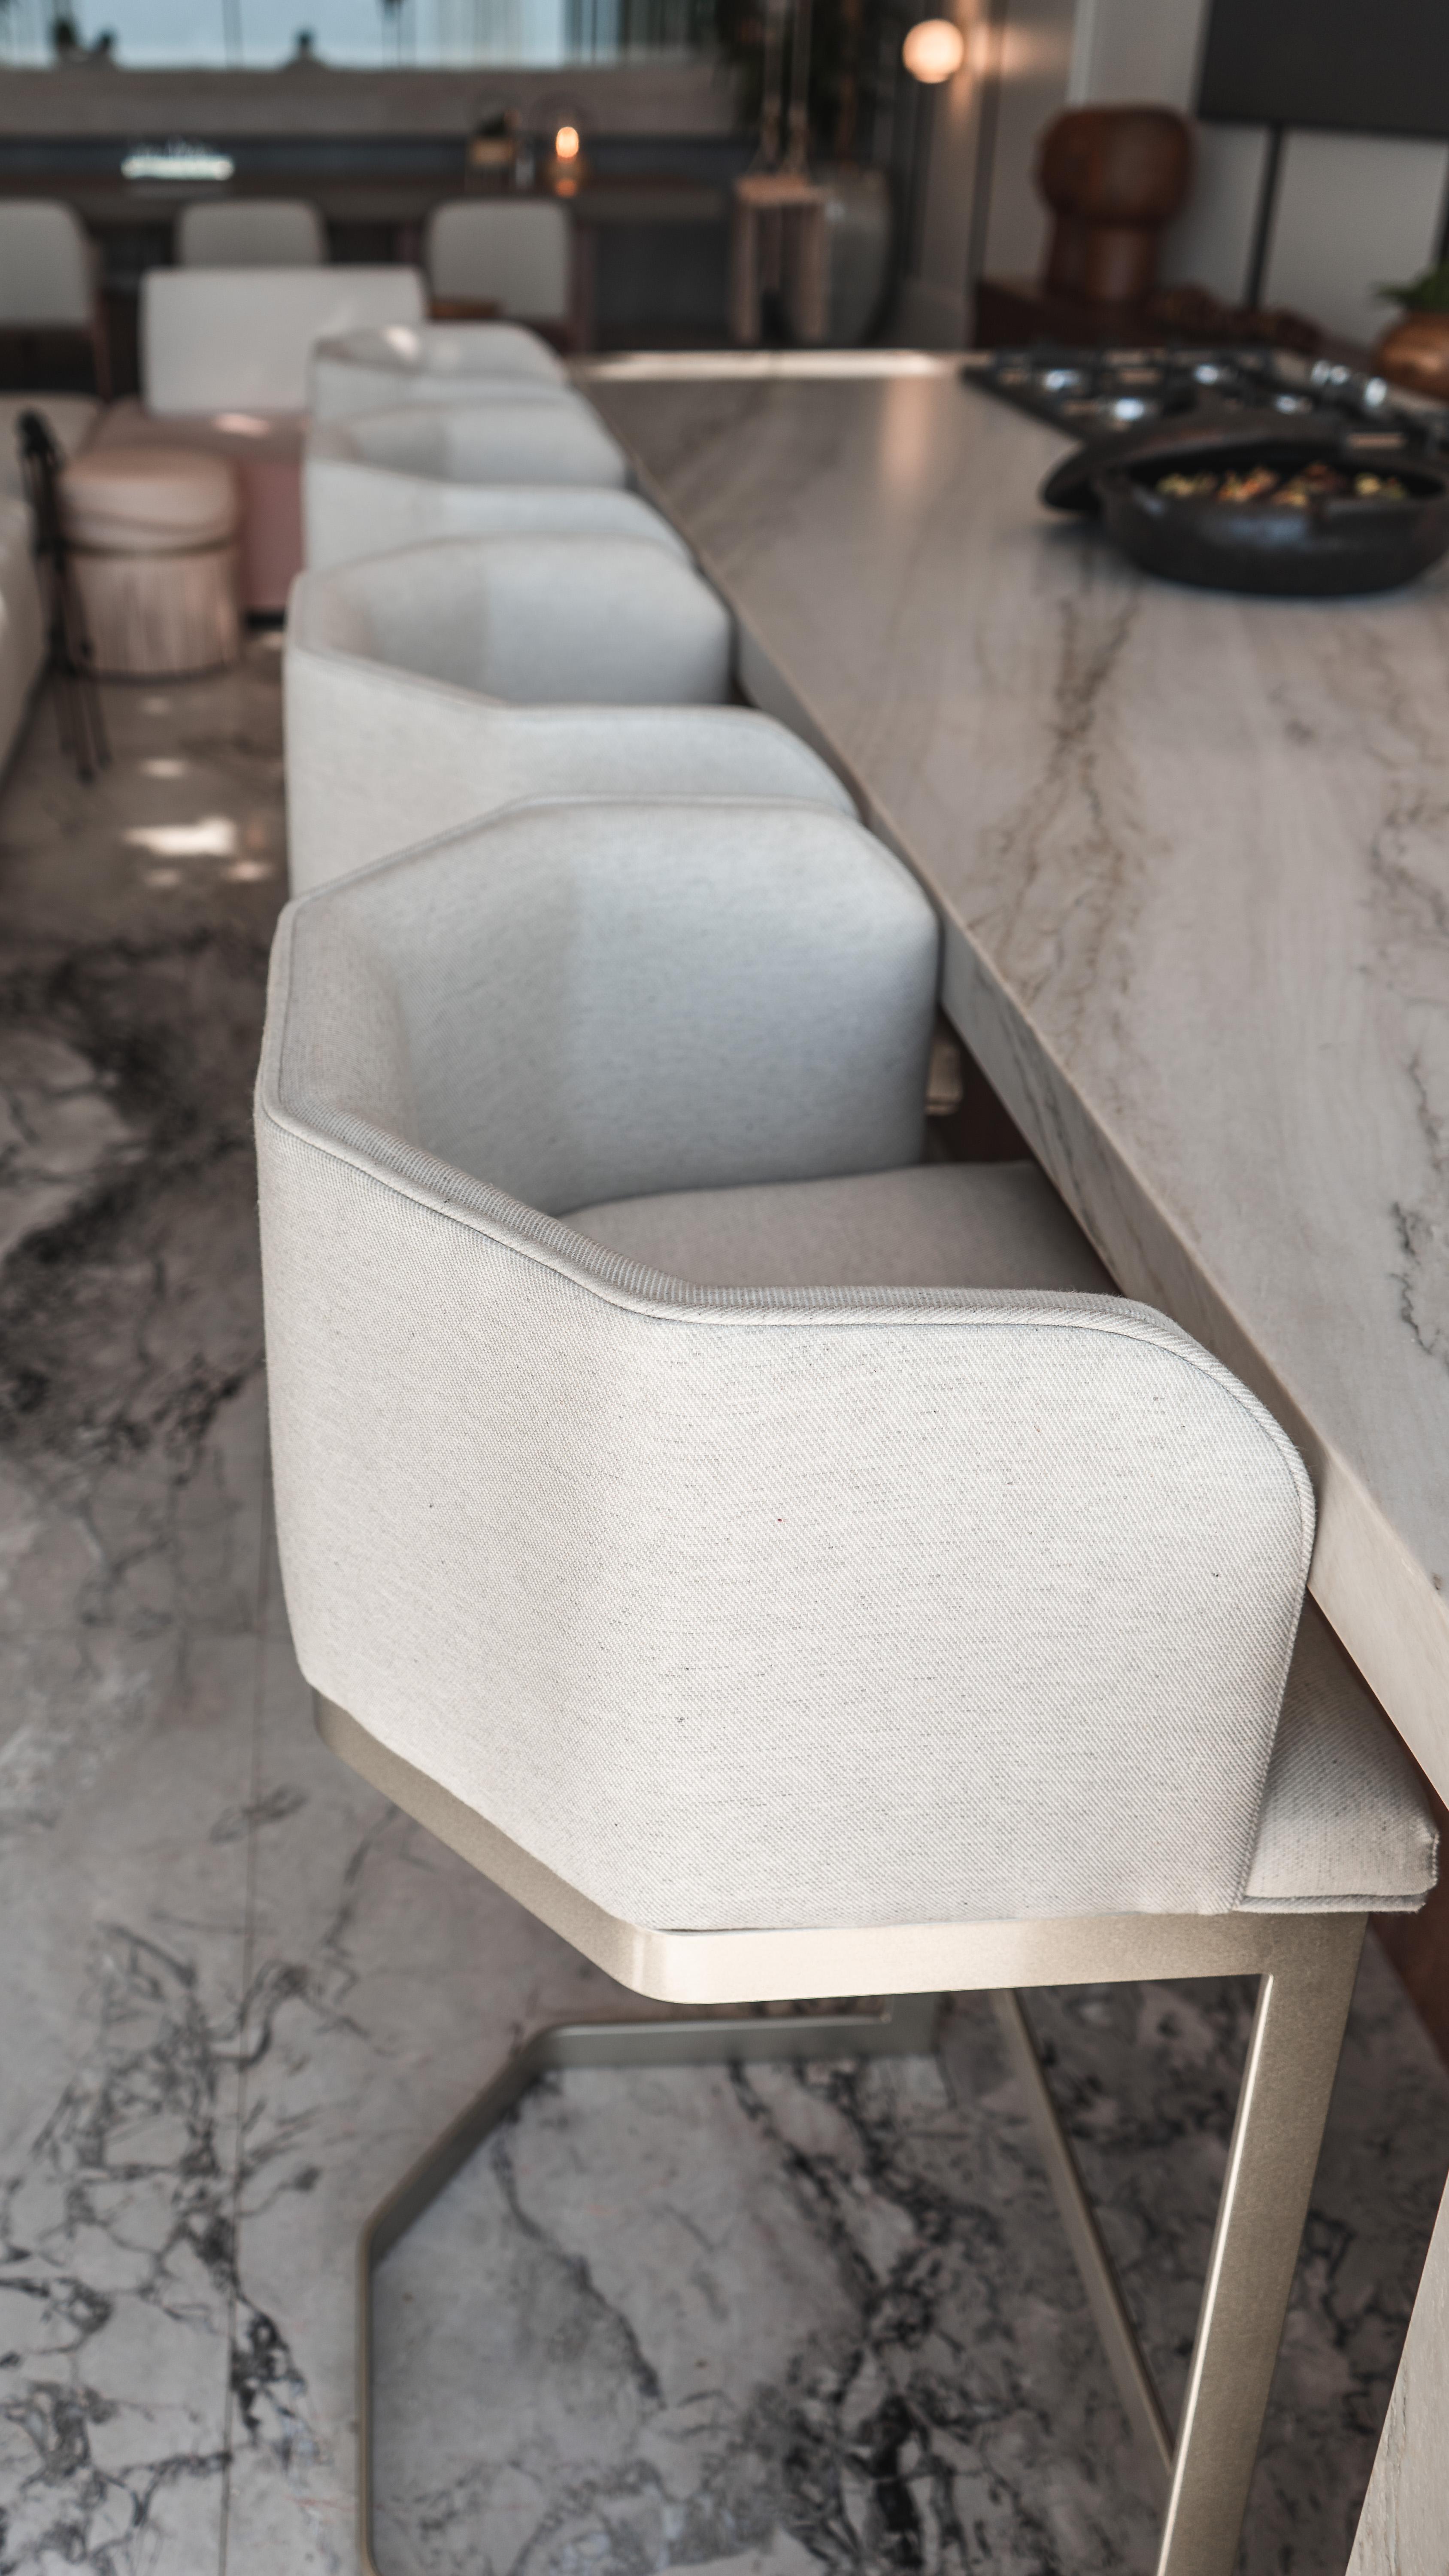 Modern Set of 4 Stools Upholstered in Linen Fabric in Champagne Colored Metallic Feet For Sale